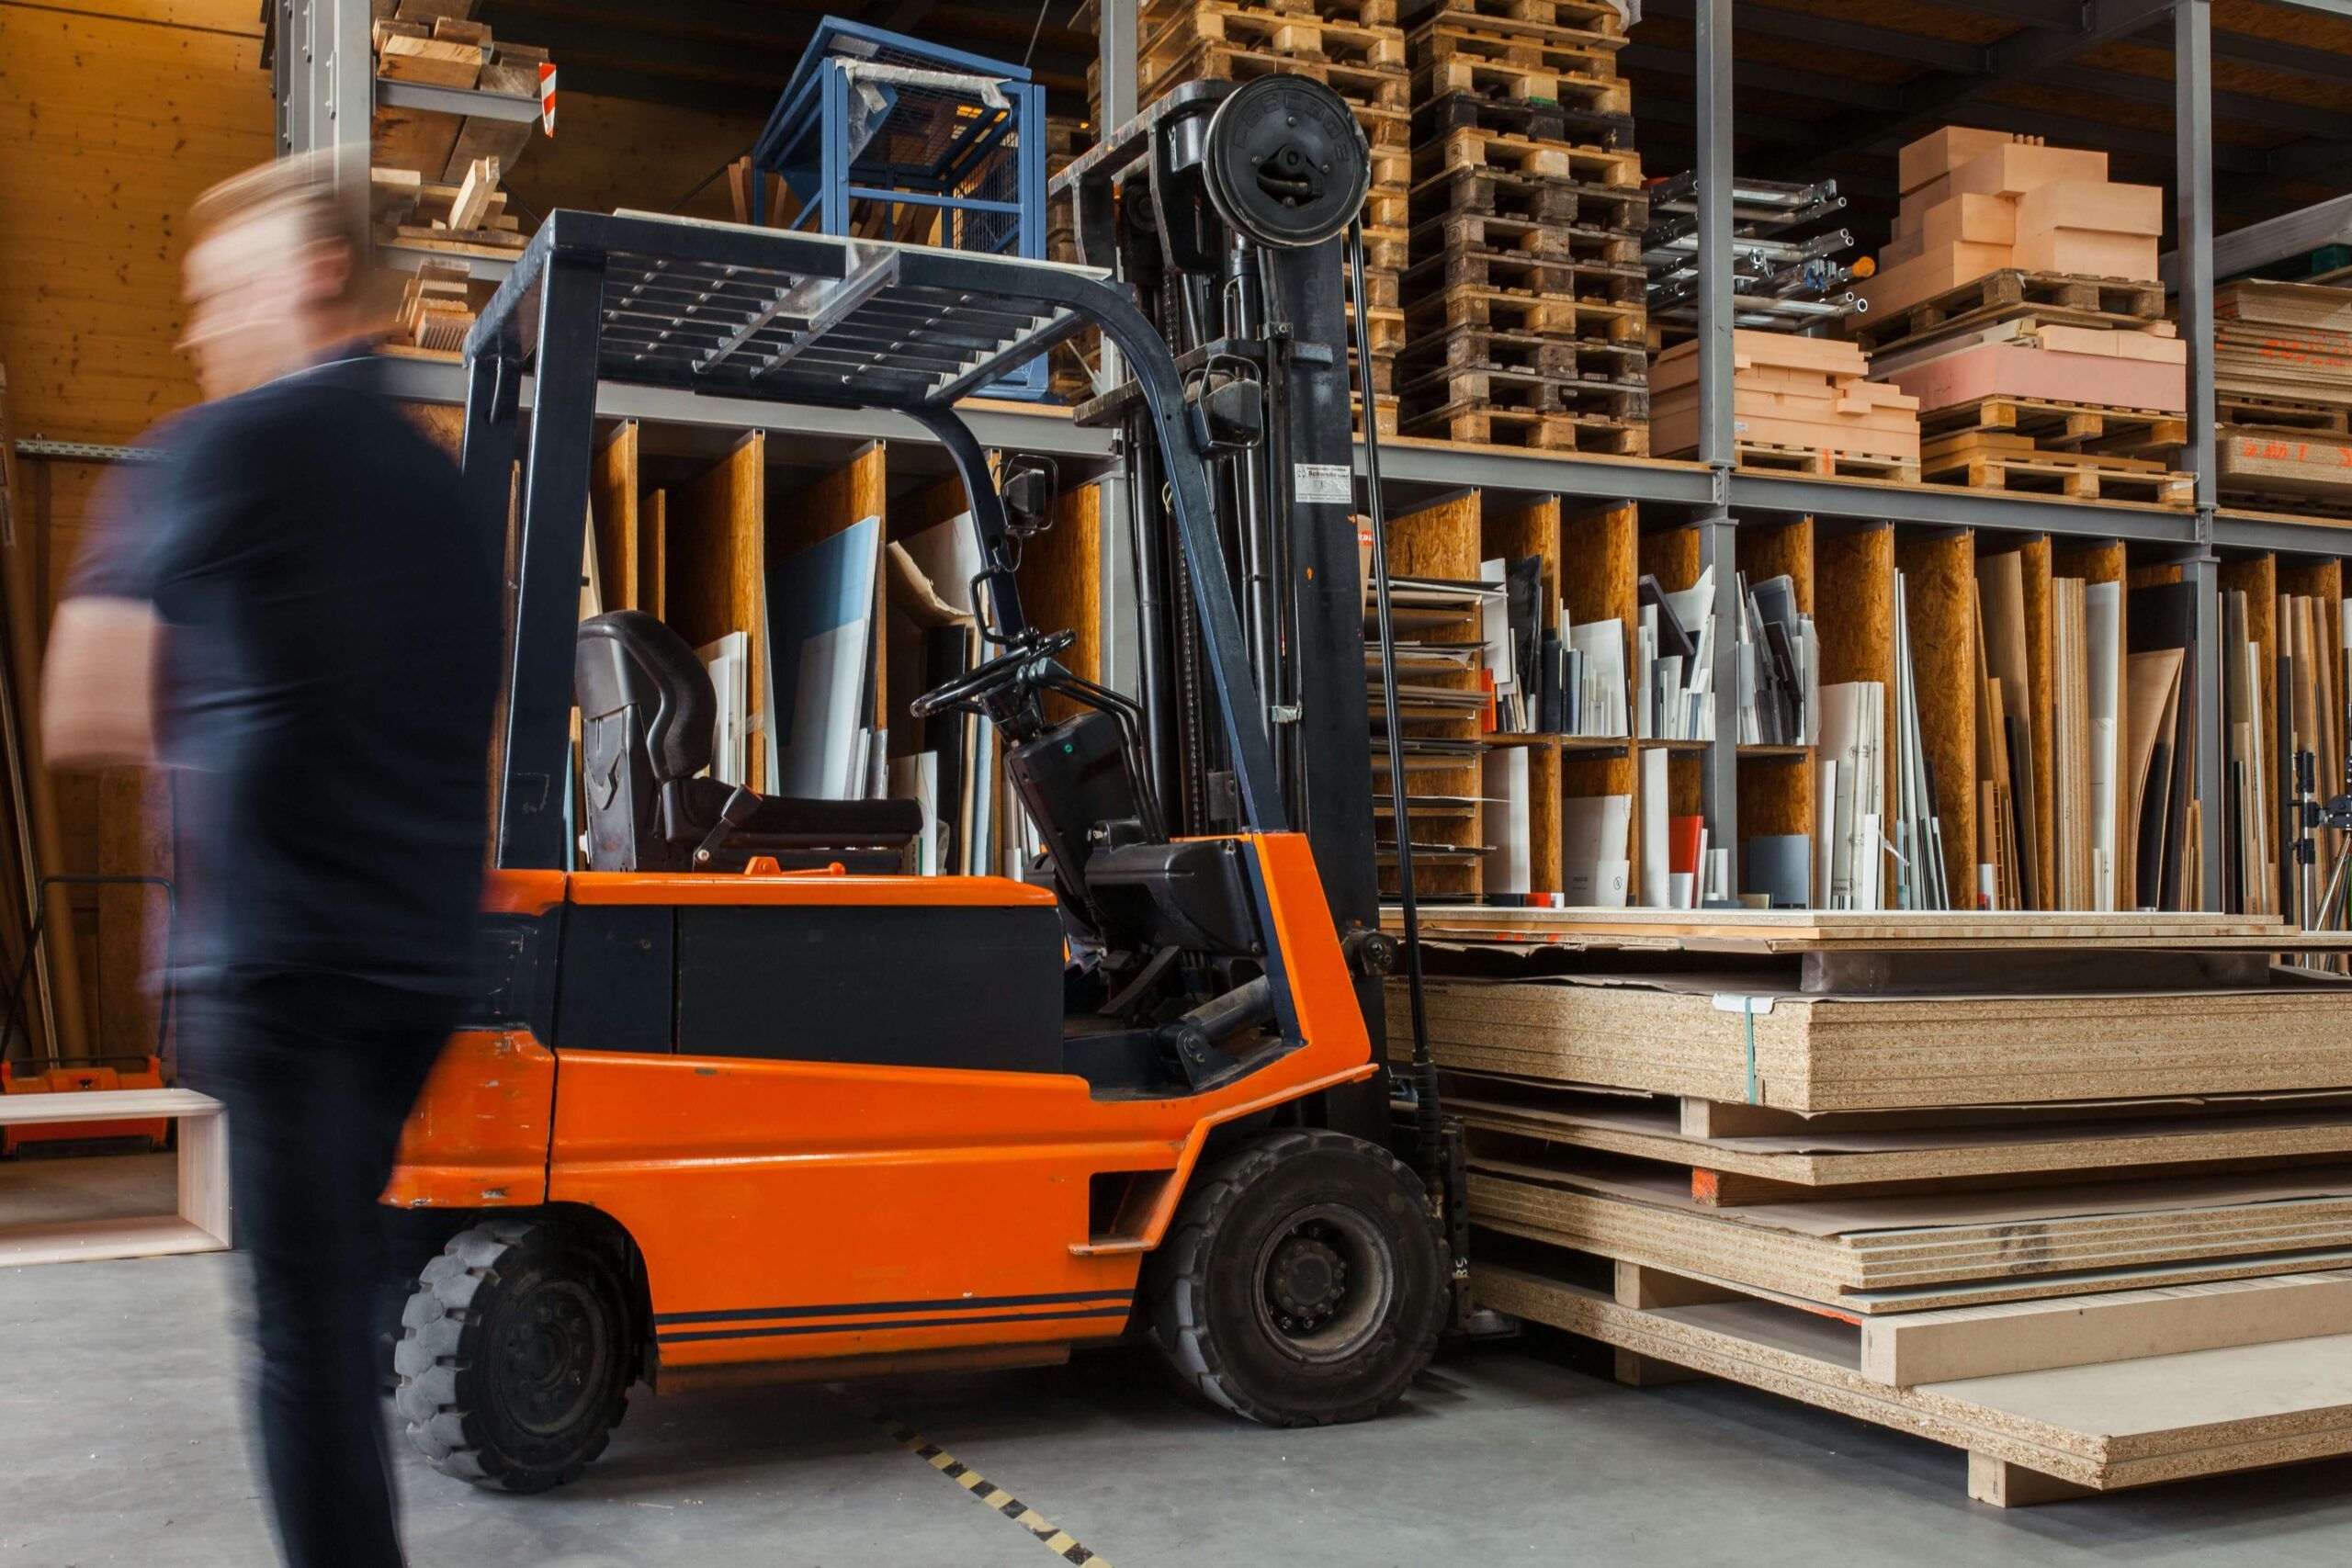 Blurry figure of a worker in a warehouse operating a forklift in a warehouse among stacks of materials and stock, depicting a busy Inventory.